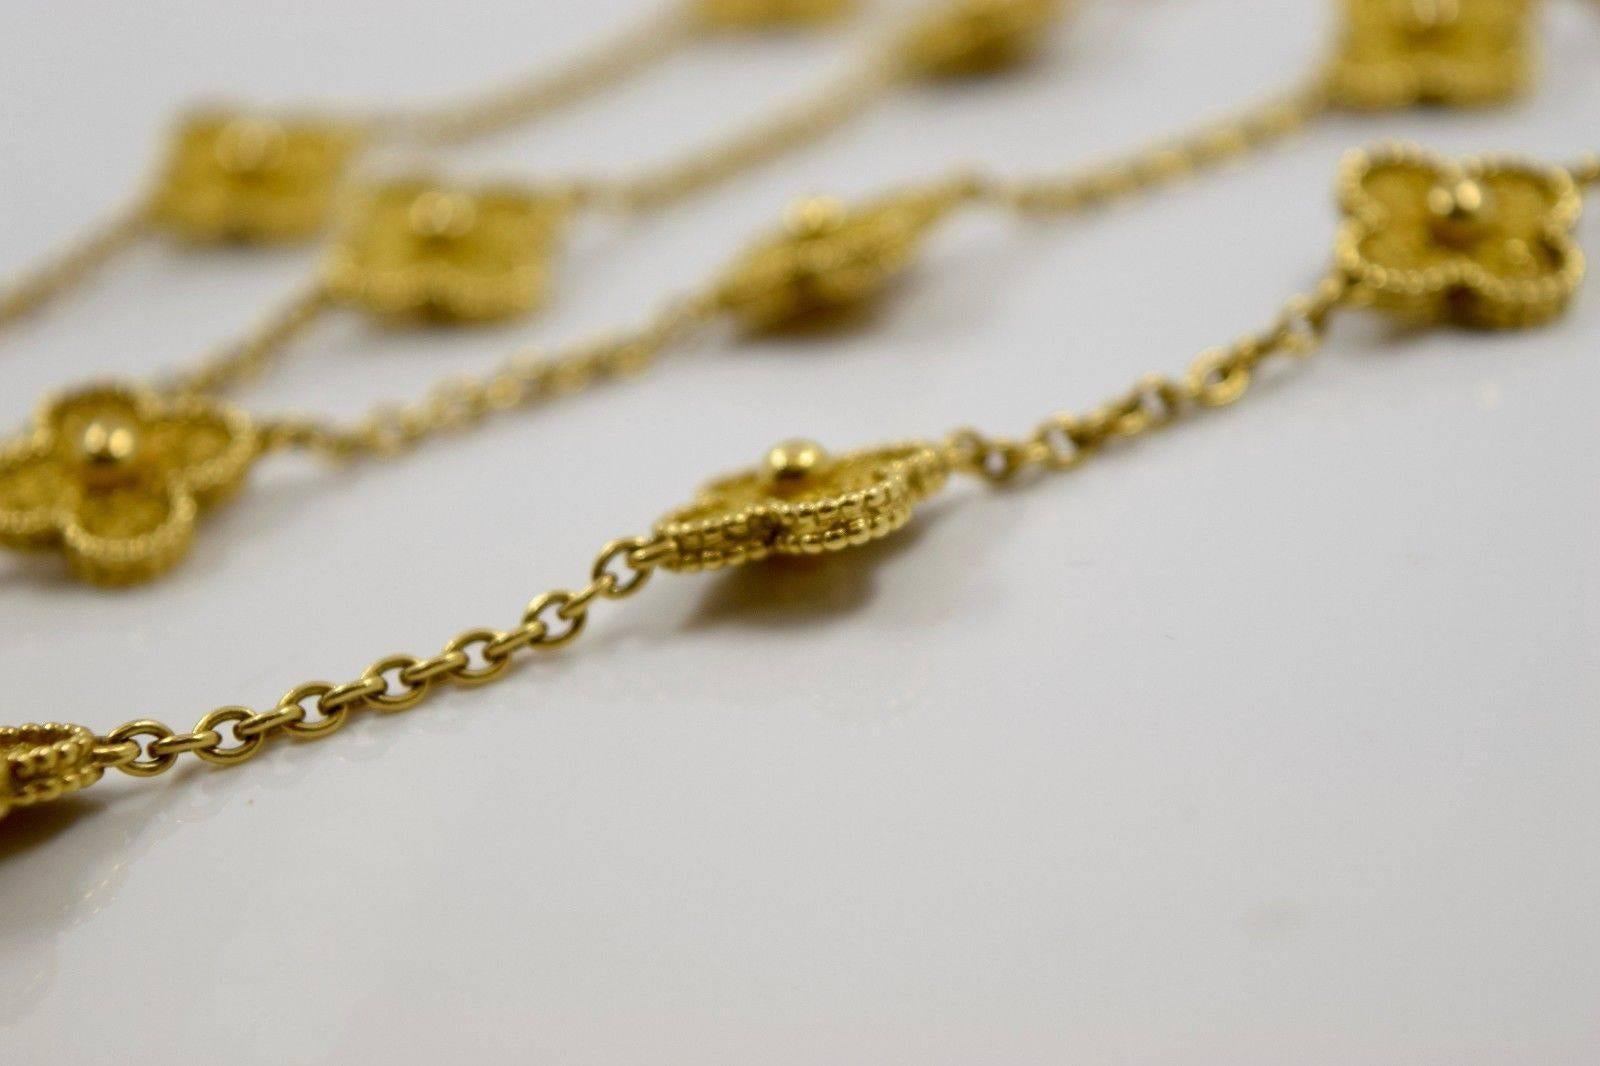 This classic long Van Cleef & Arpels necklace from the iconic Vintage Alhambra collection is crafted in 18k yellow gold and features 20 lucky clover motifs with round bead edges. Made in France circa 1980s.

Creator: Van Cleef & Arpels
Condition: